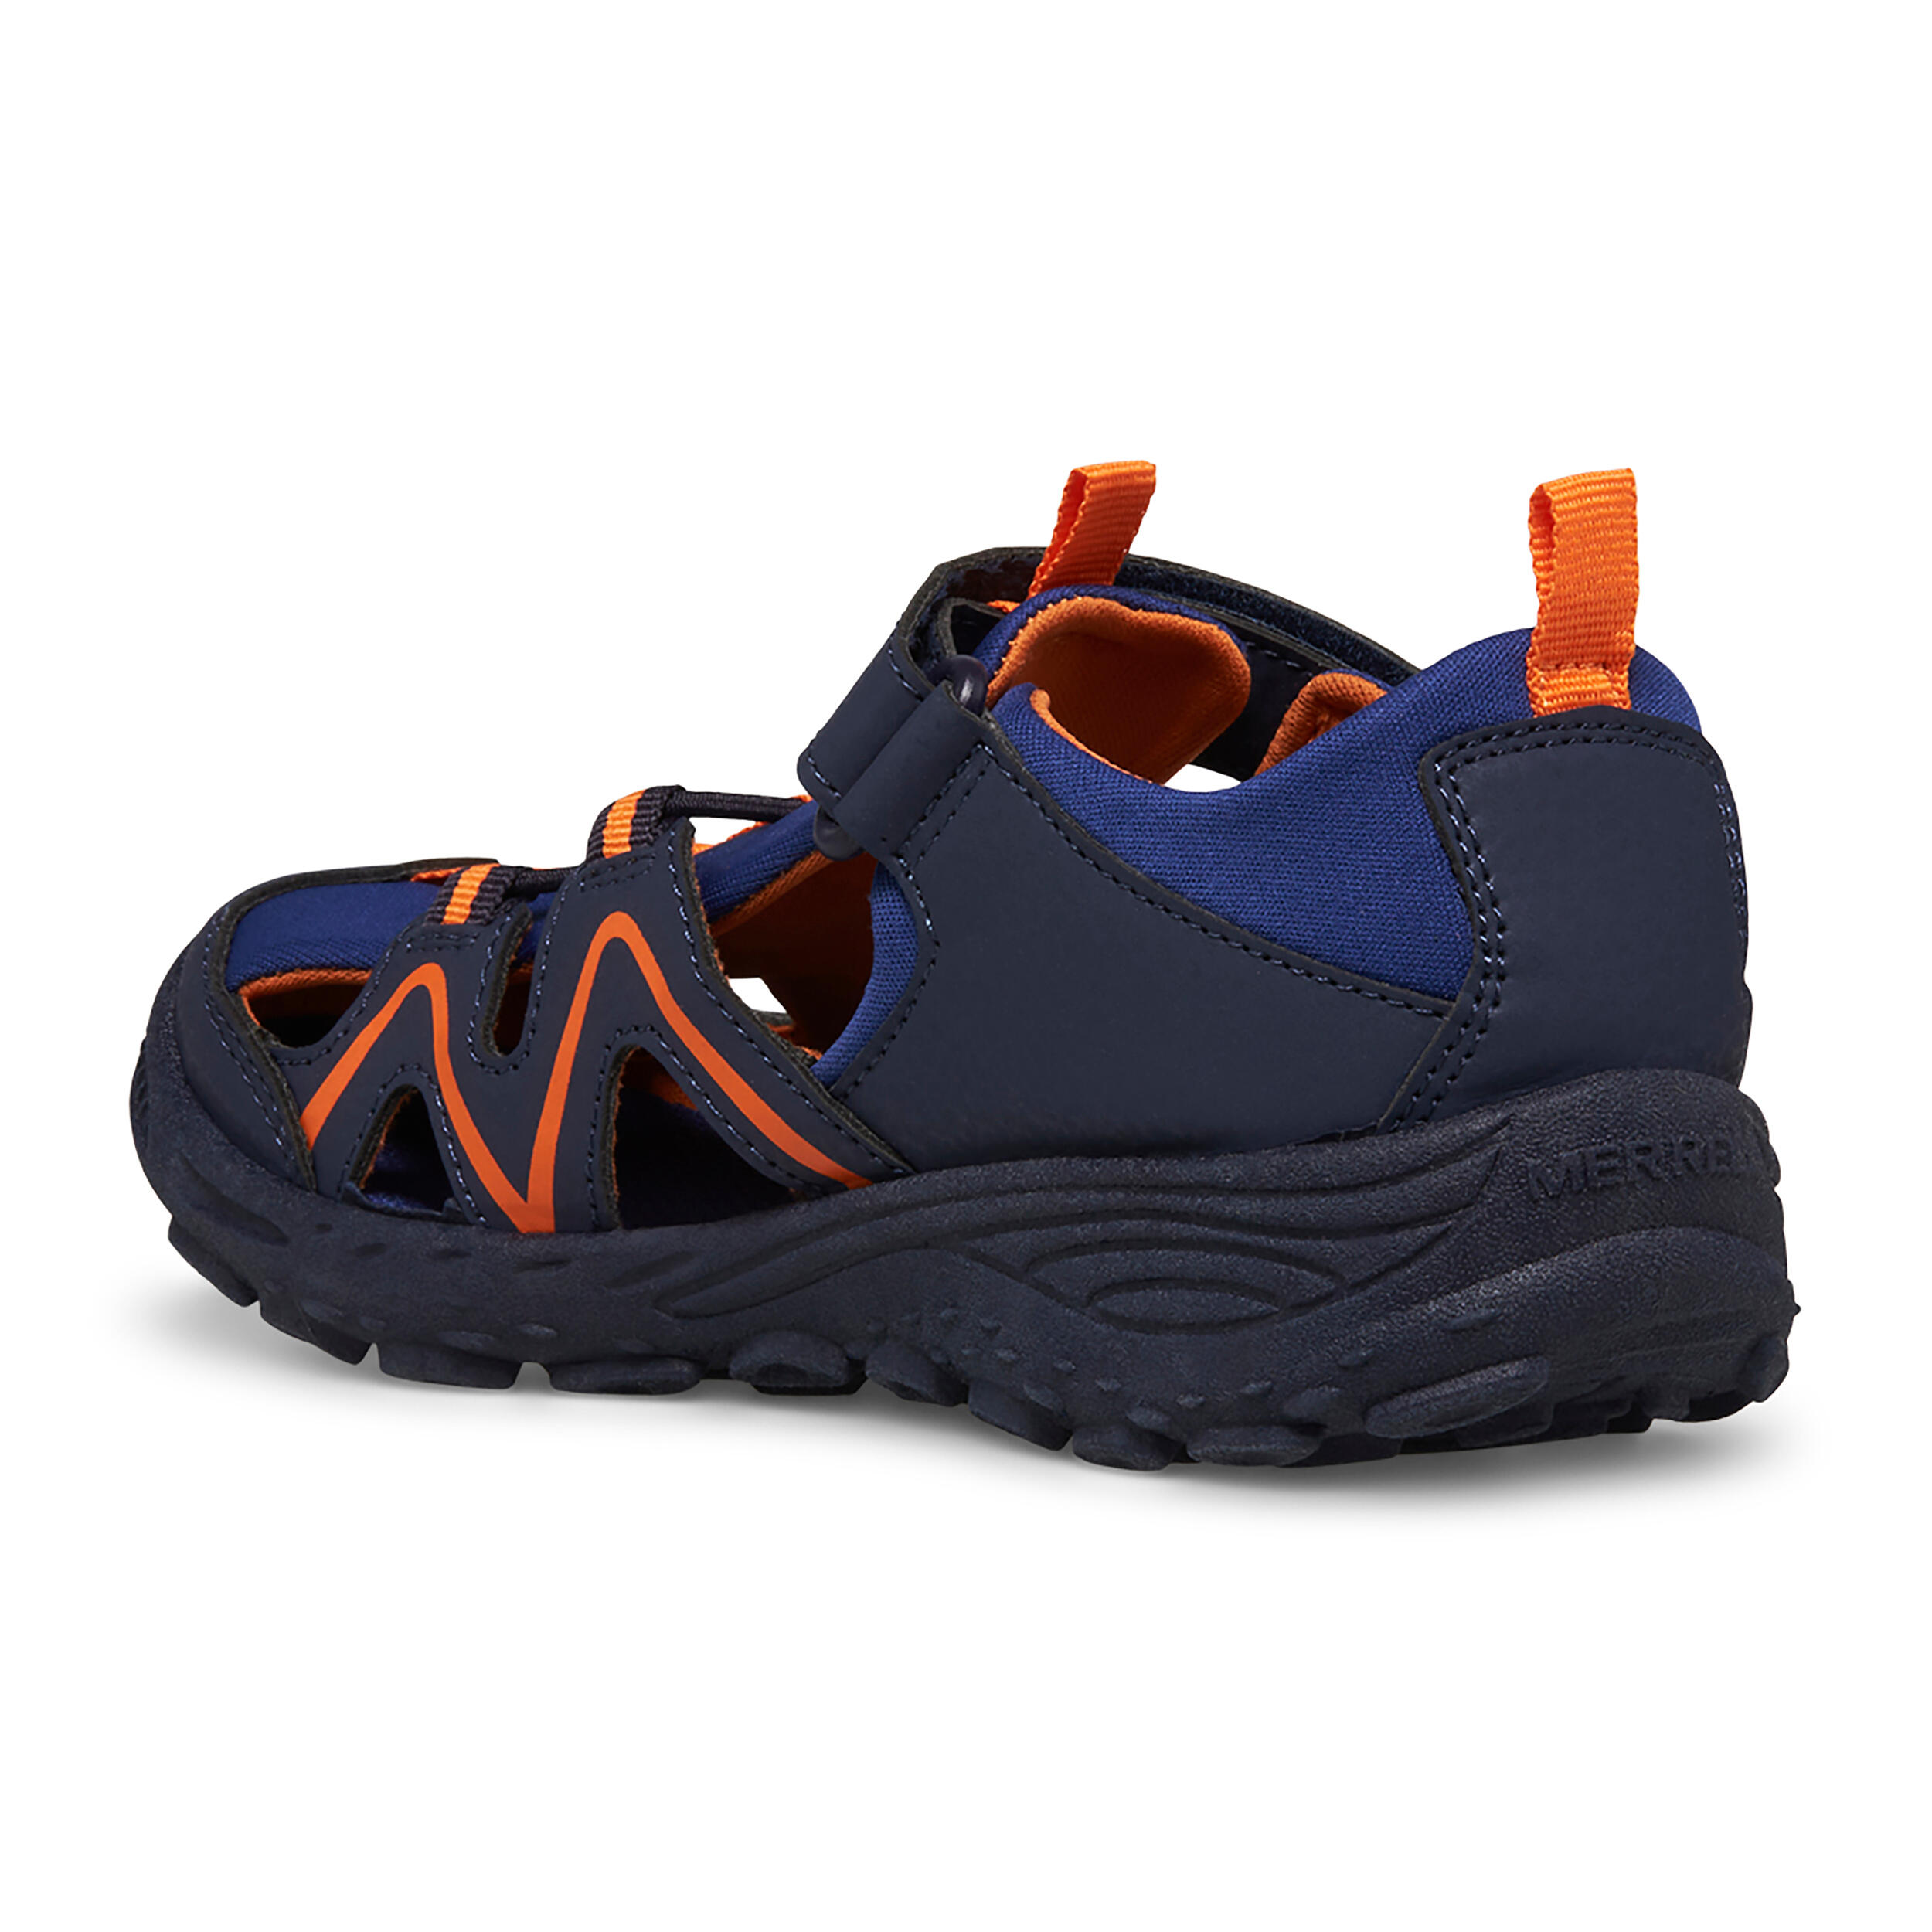 HYDRO EXPLORER sandals from size 9 to 5 4/5